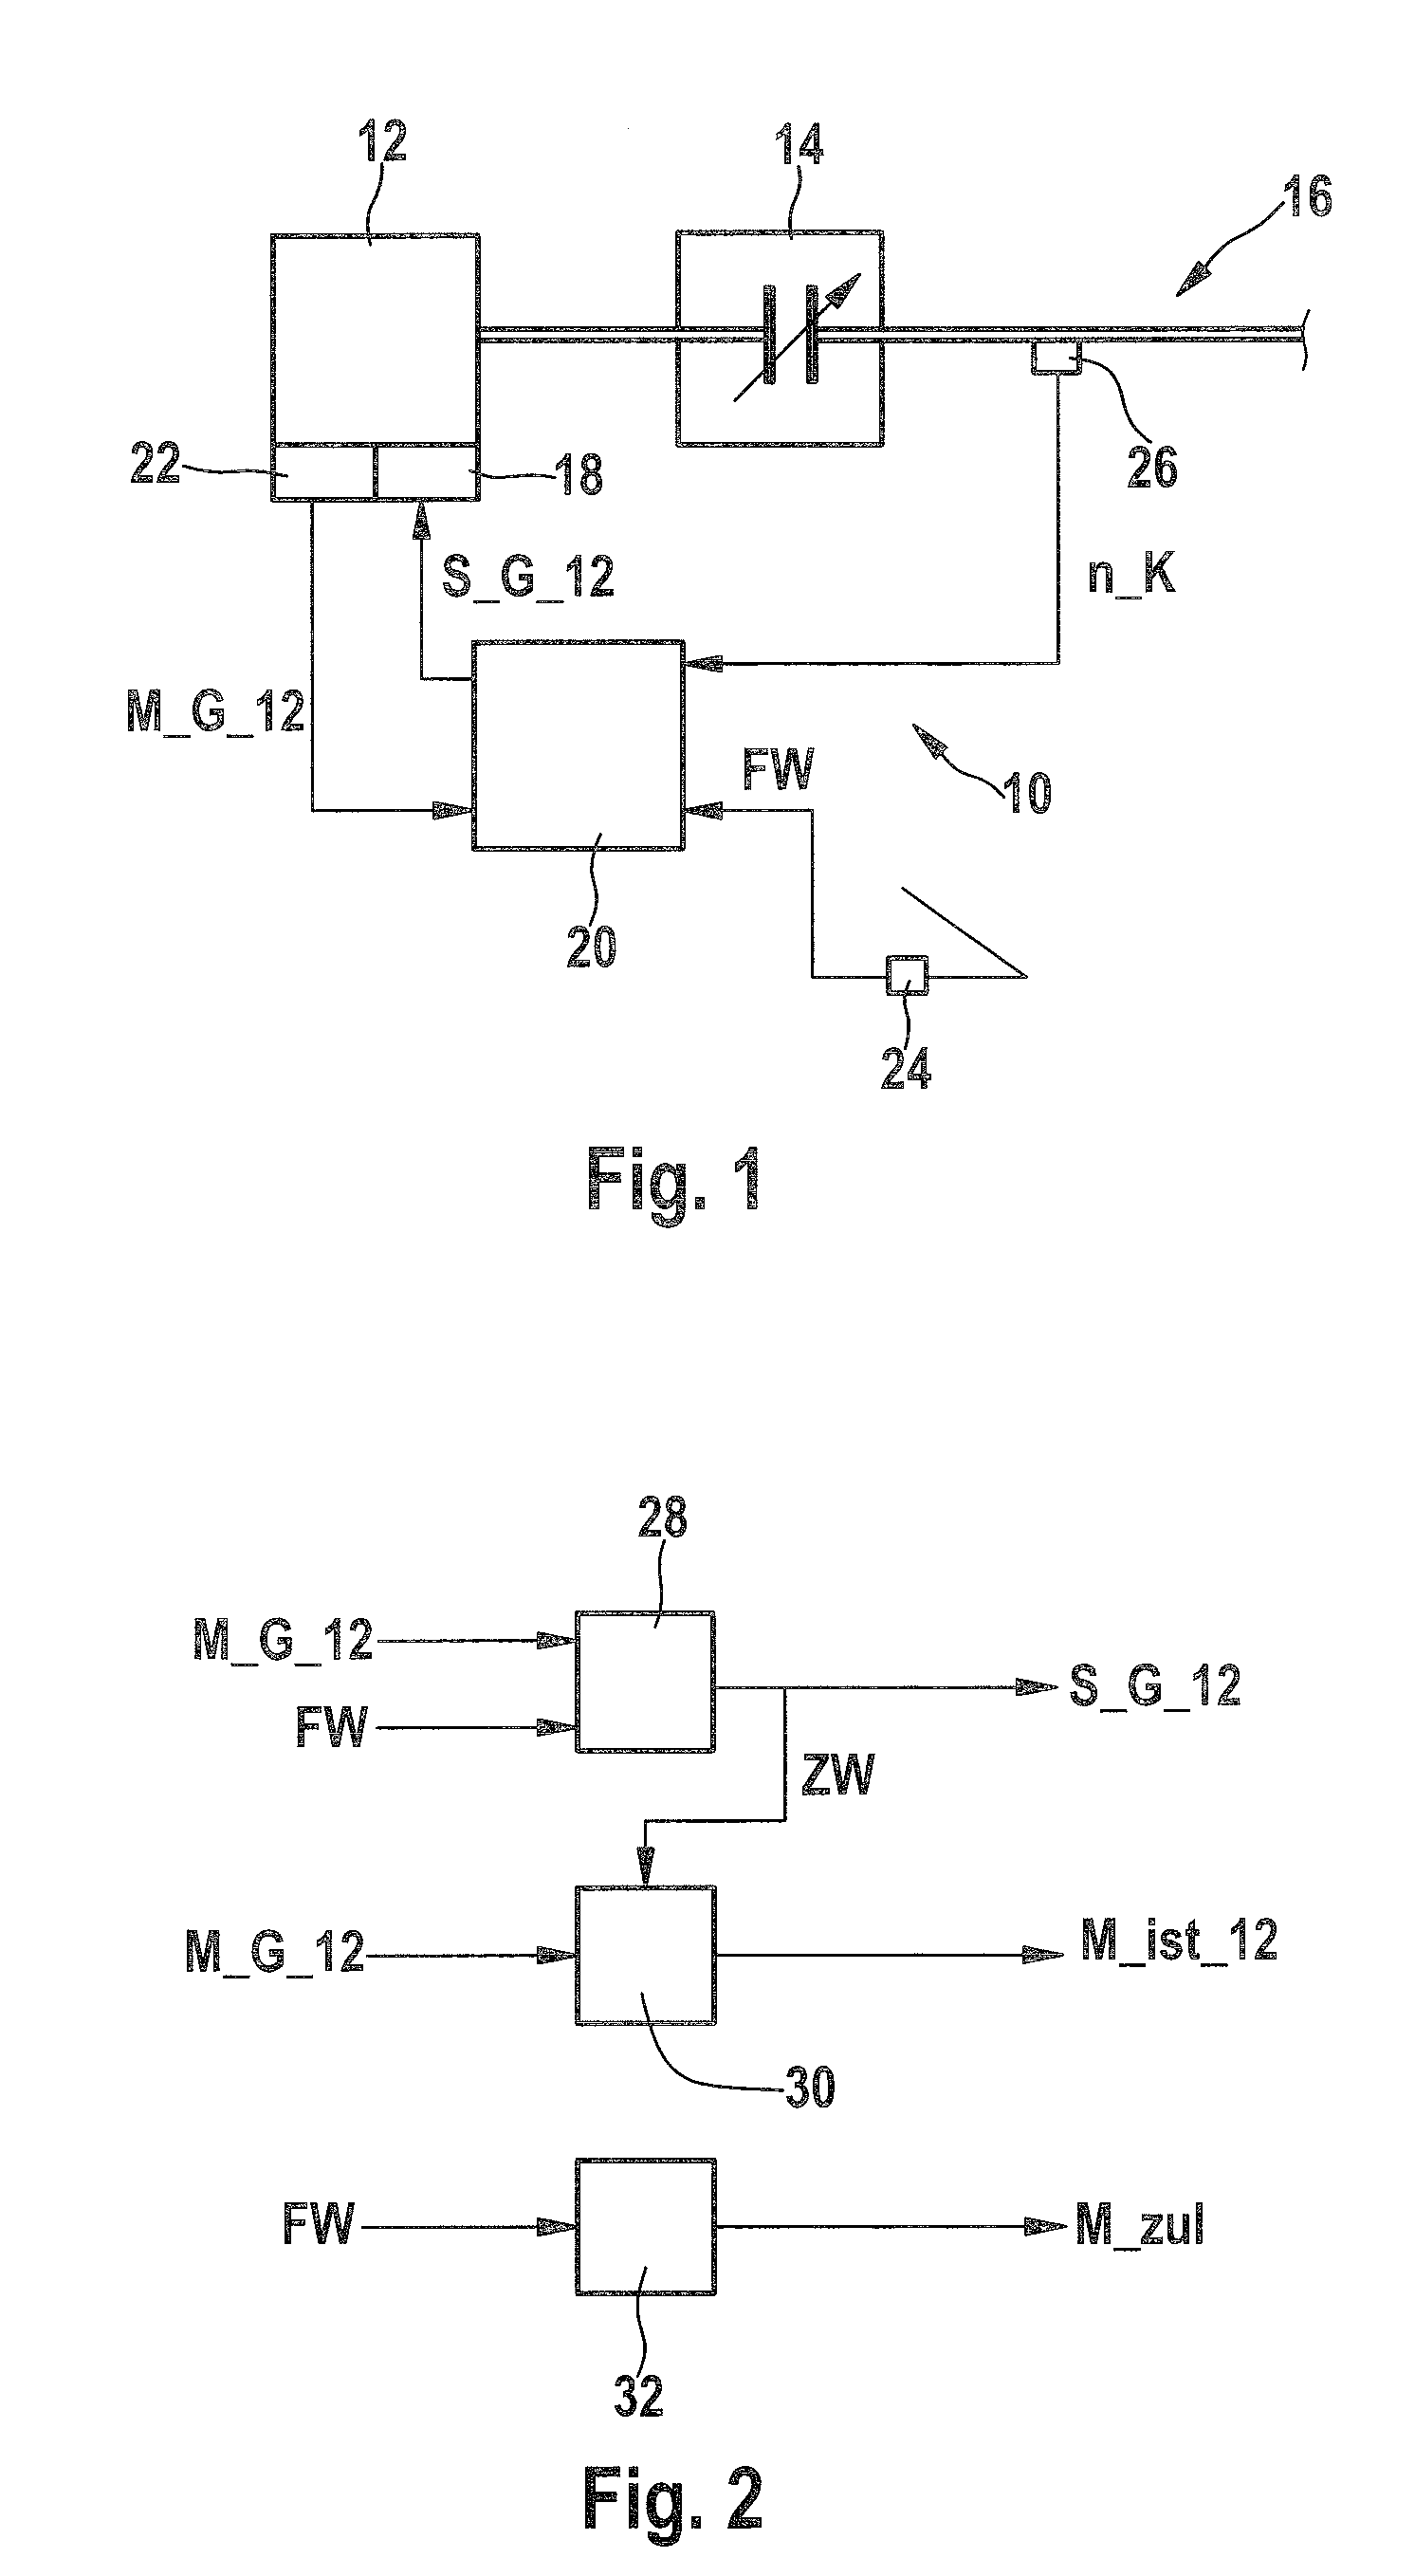 Method and control device for monitoring and limiting the torque in a drive train of a road motor vehicle